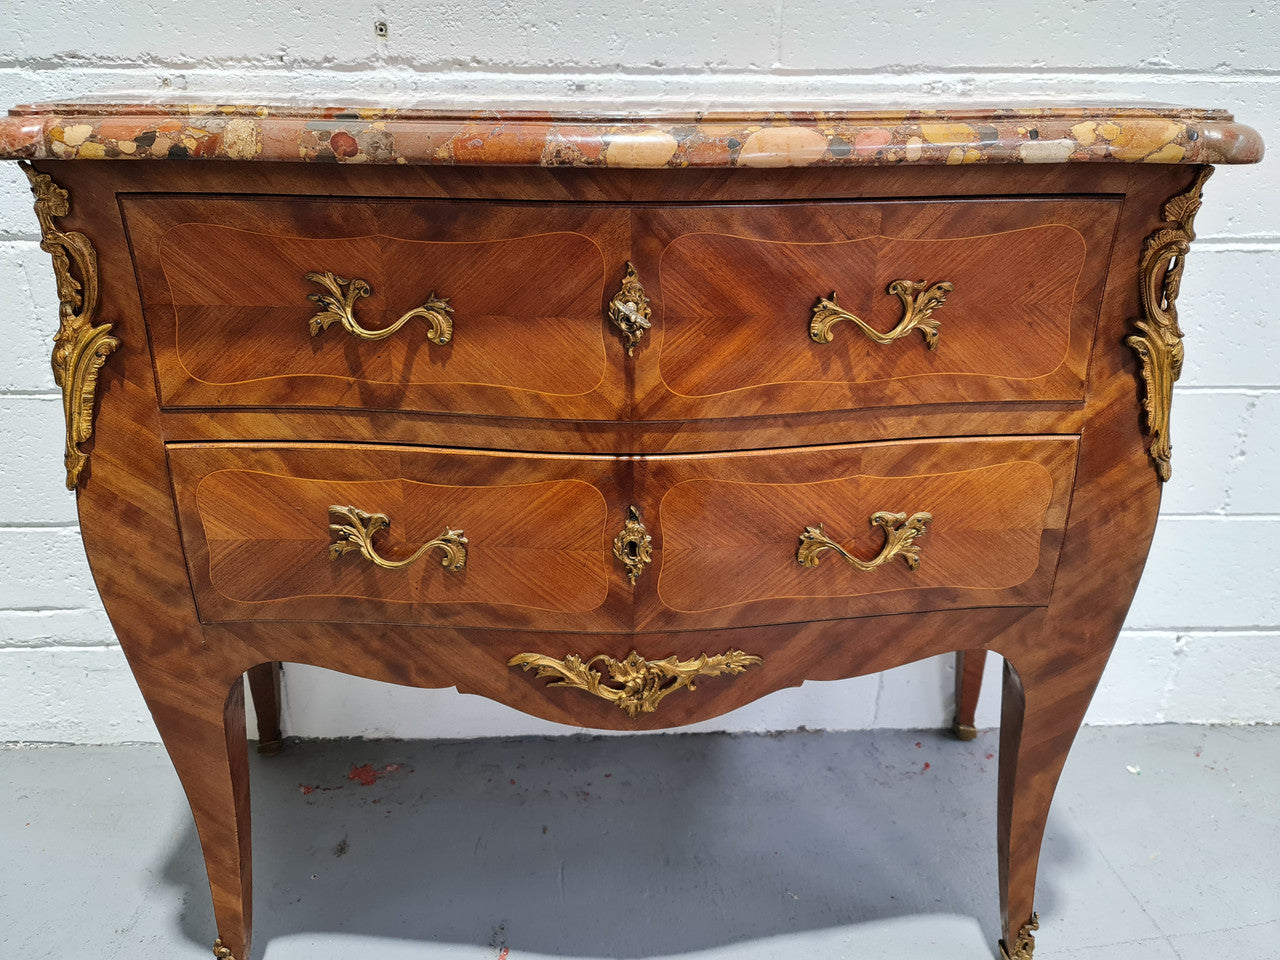 High quality French Mahogany Louis XVth style marble top commode. It has an eye catching marble top and is signed on body "J Bamelis". In very good original detailed condition.